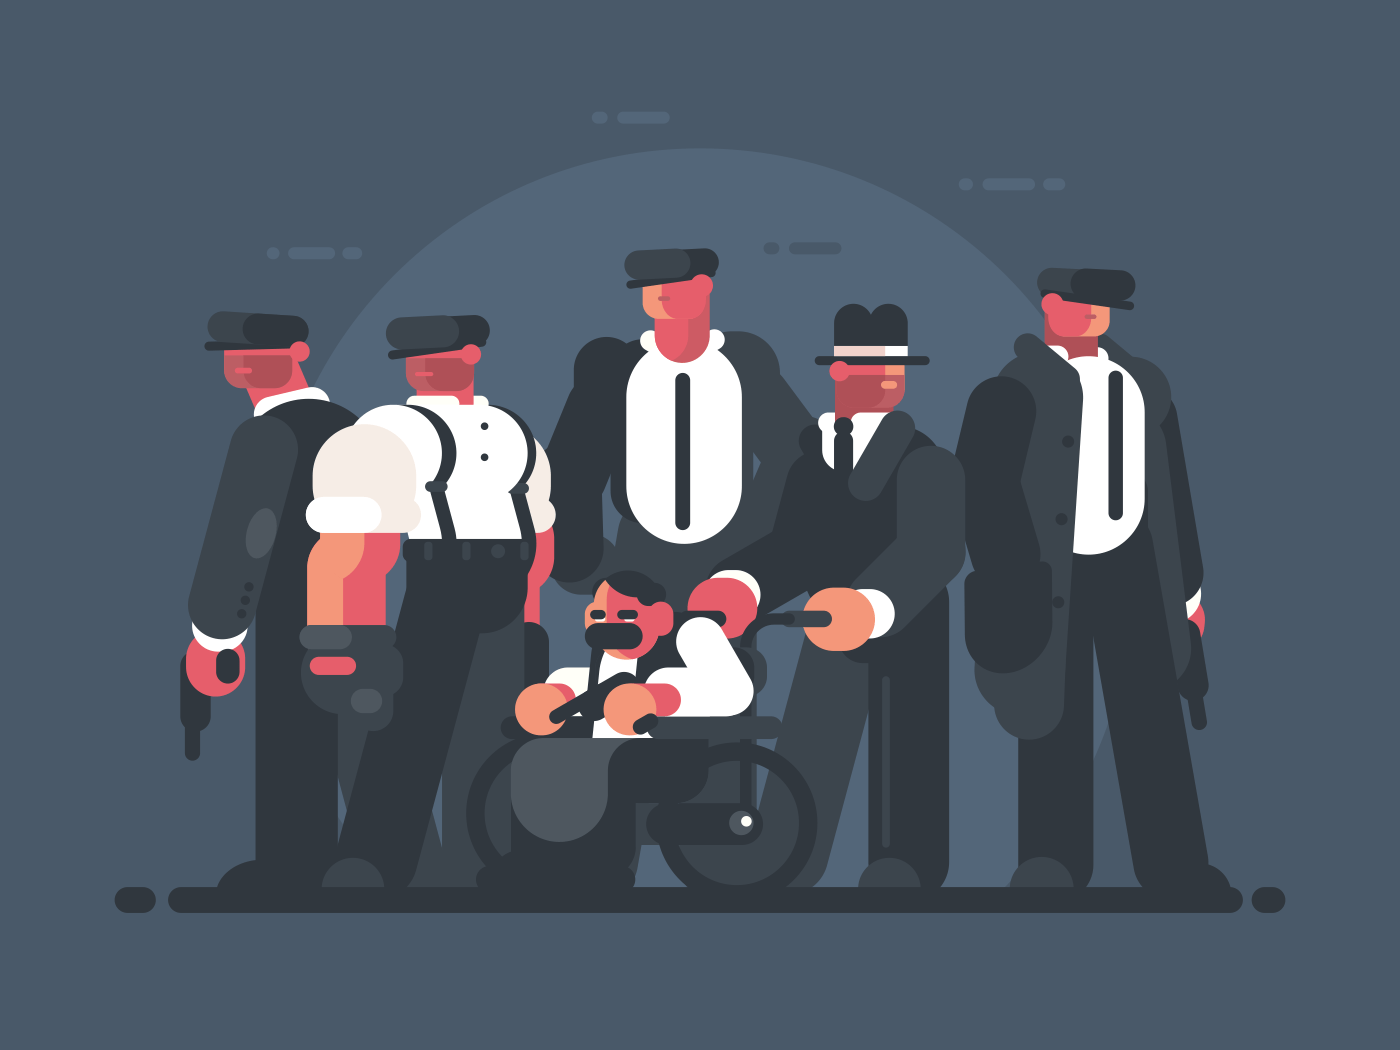 Godfather of mafia. Man in wheelchair and group of gangsters. Vector illustration